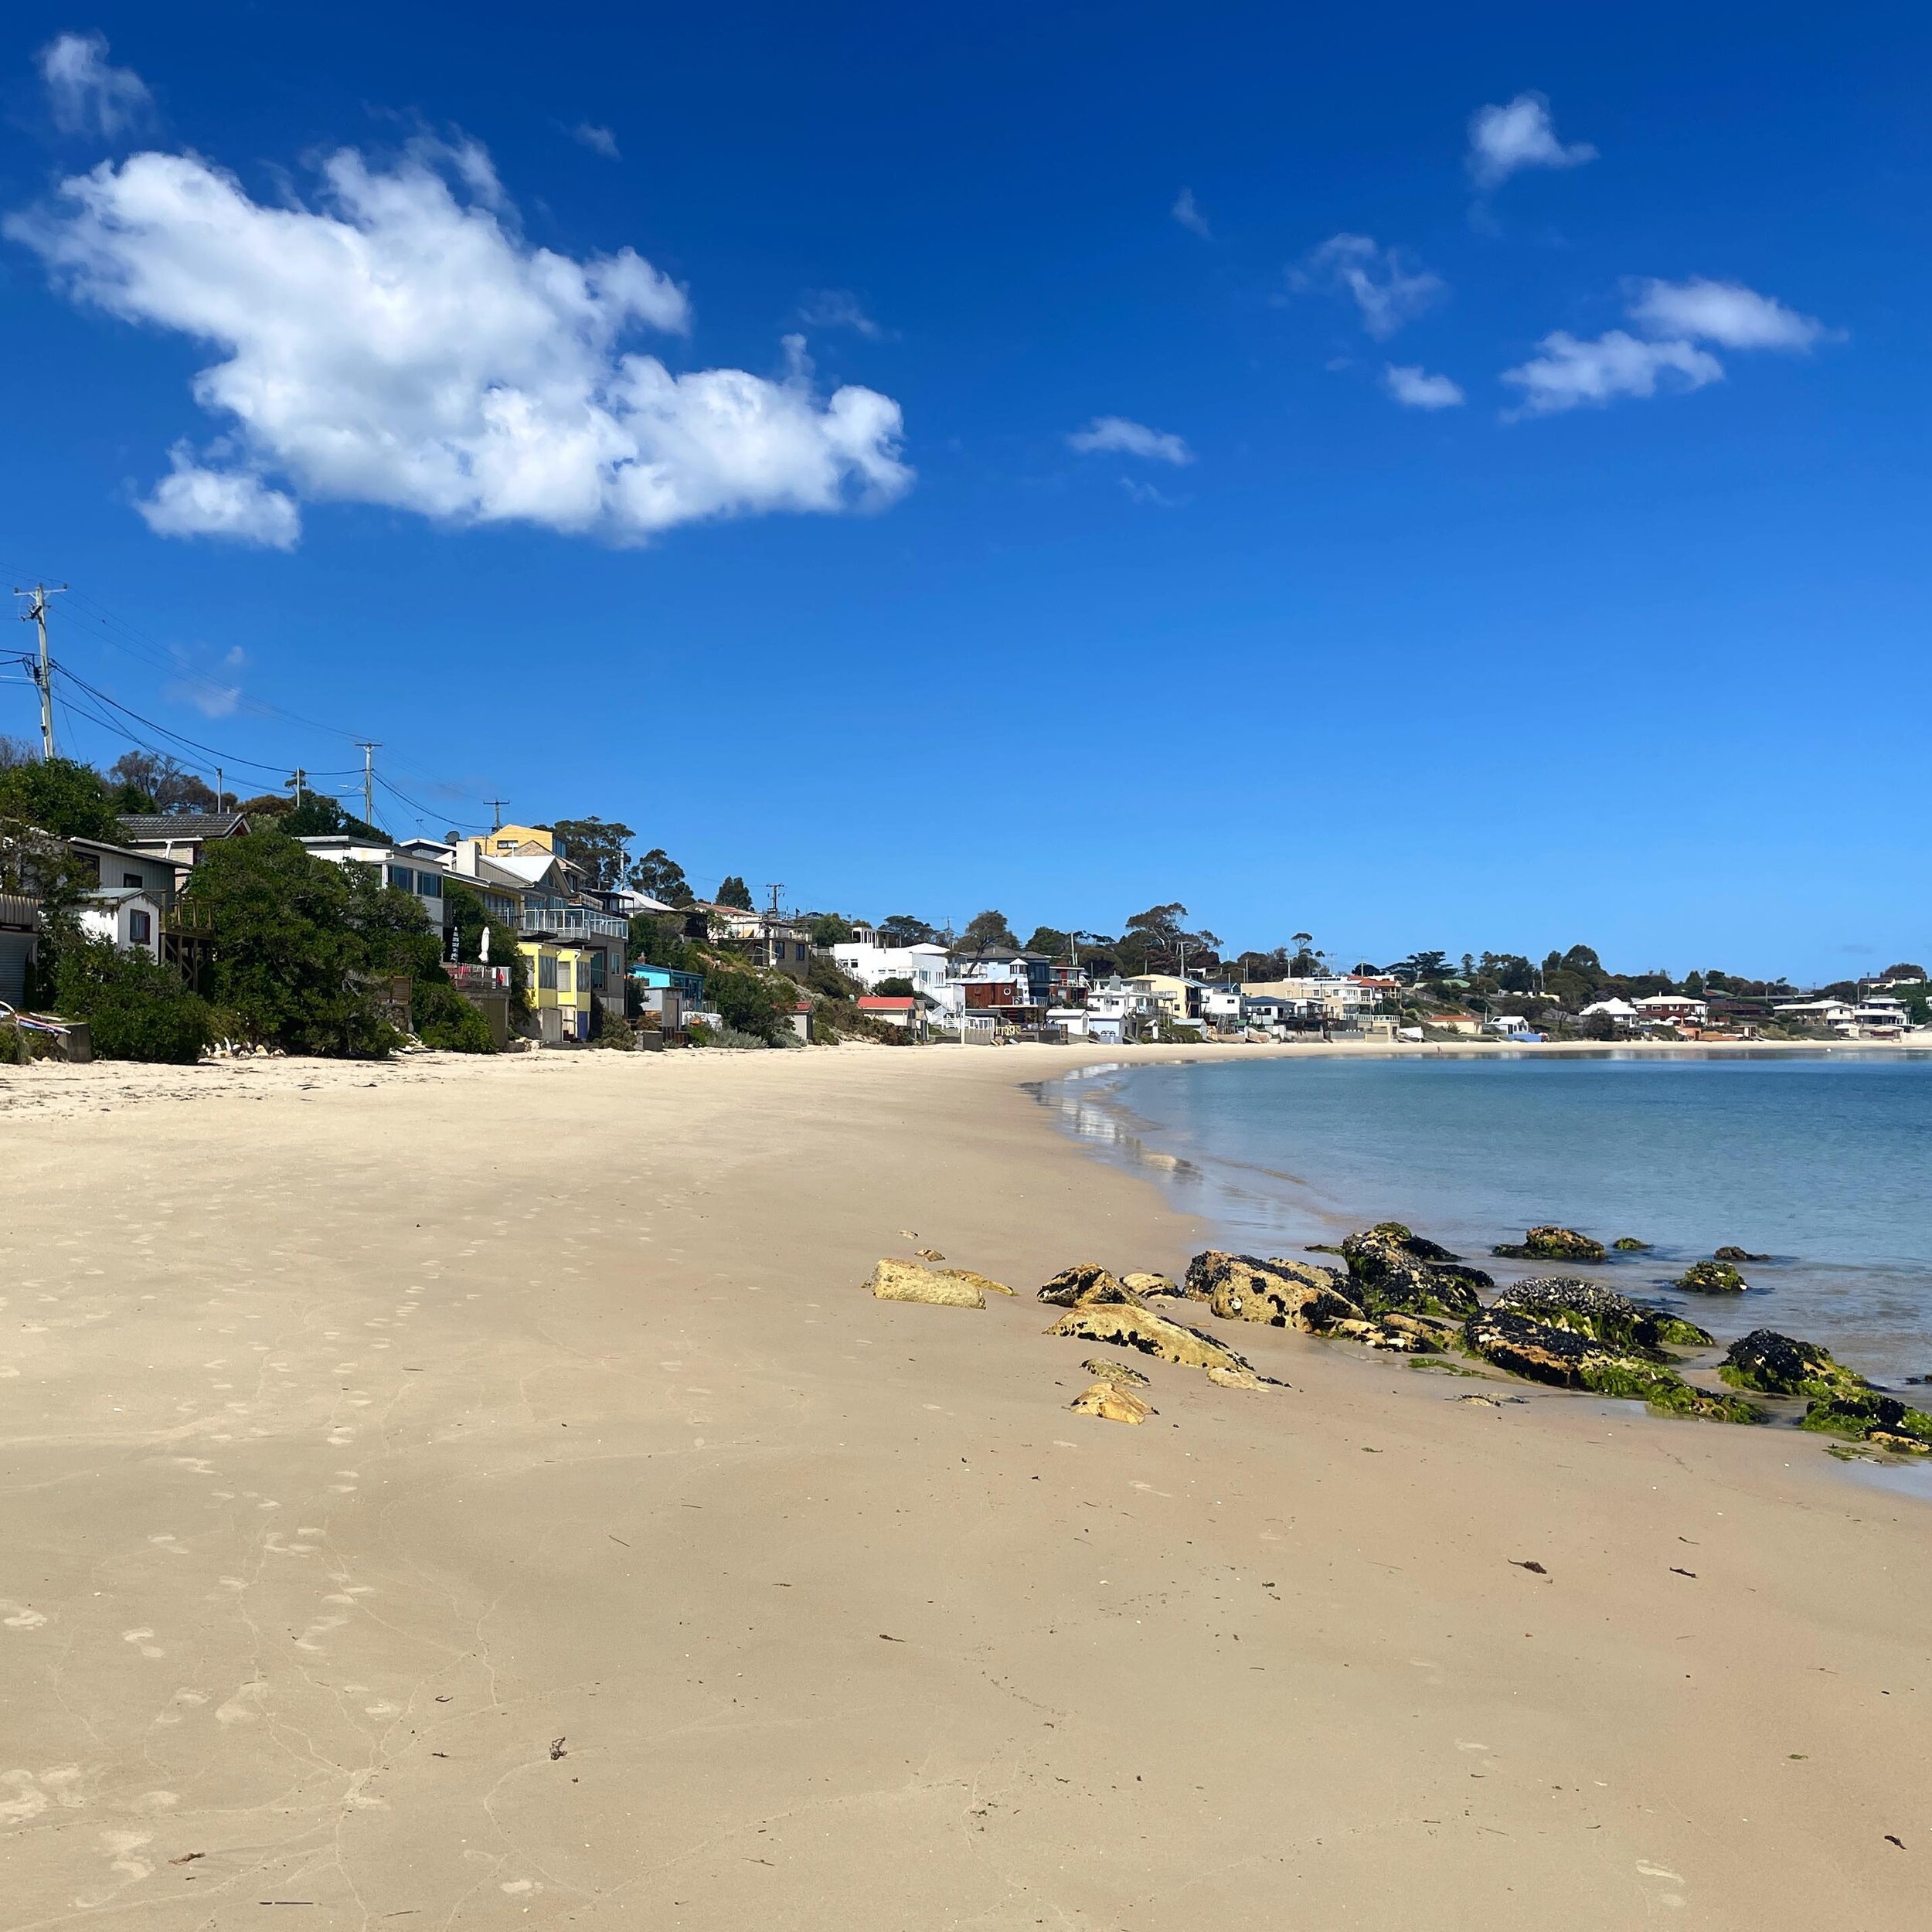 Last week we had the pleasure of spending a couple of days assessing beaches in glorious Tasmanian sunshine for a project we&rsquo;re currently working on. Including this one, Opossum Bay Beach, south of Hobart #landscapearchitecture